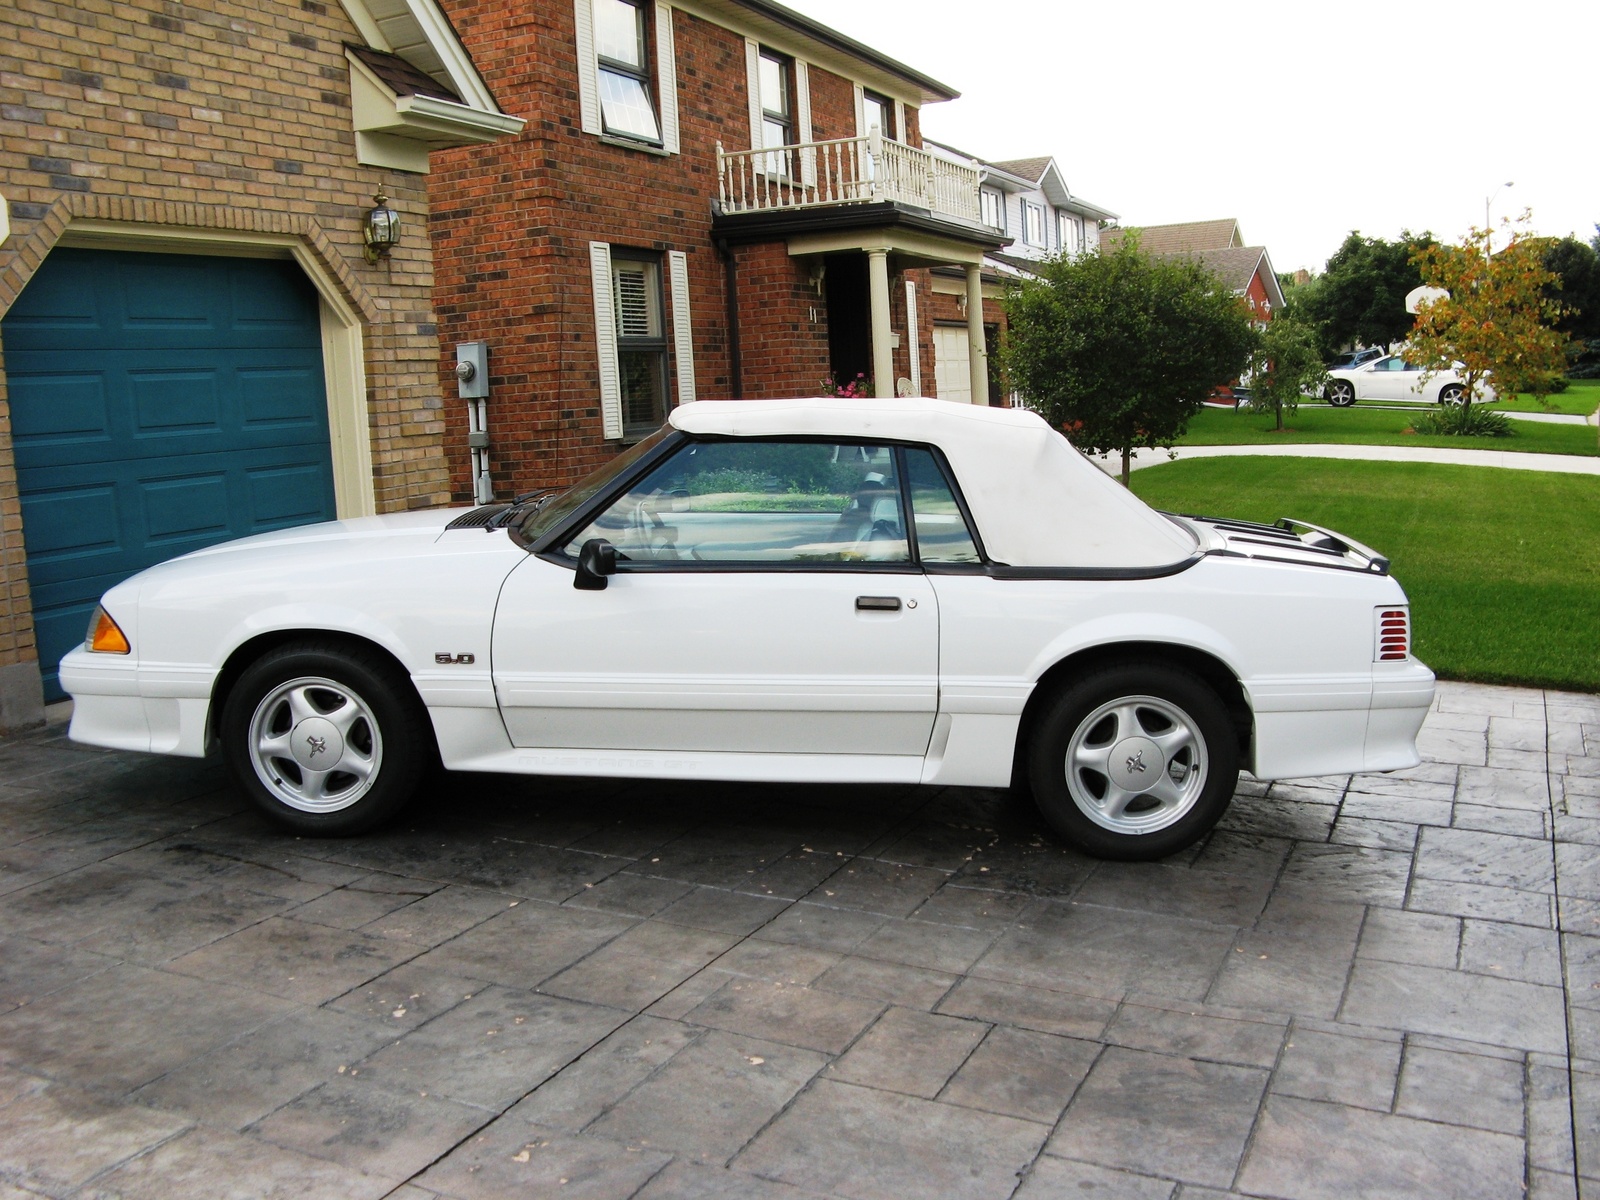 1992 Convertible ford lx mustang #4